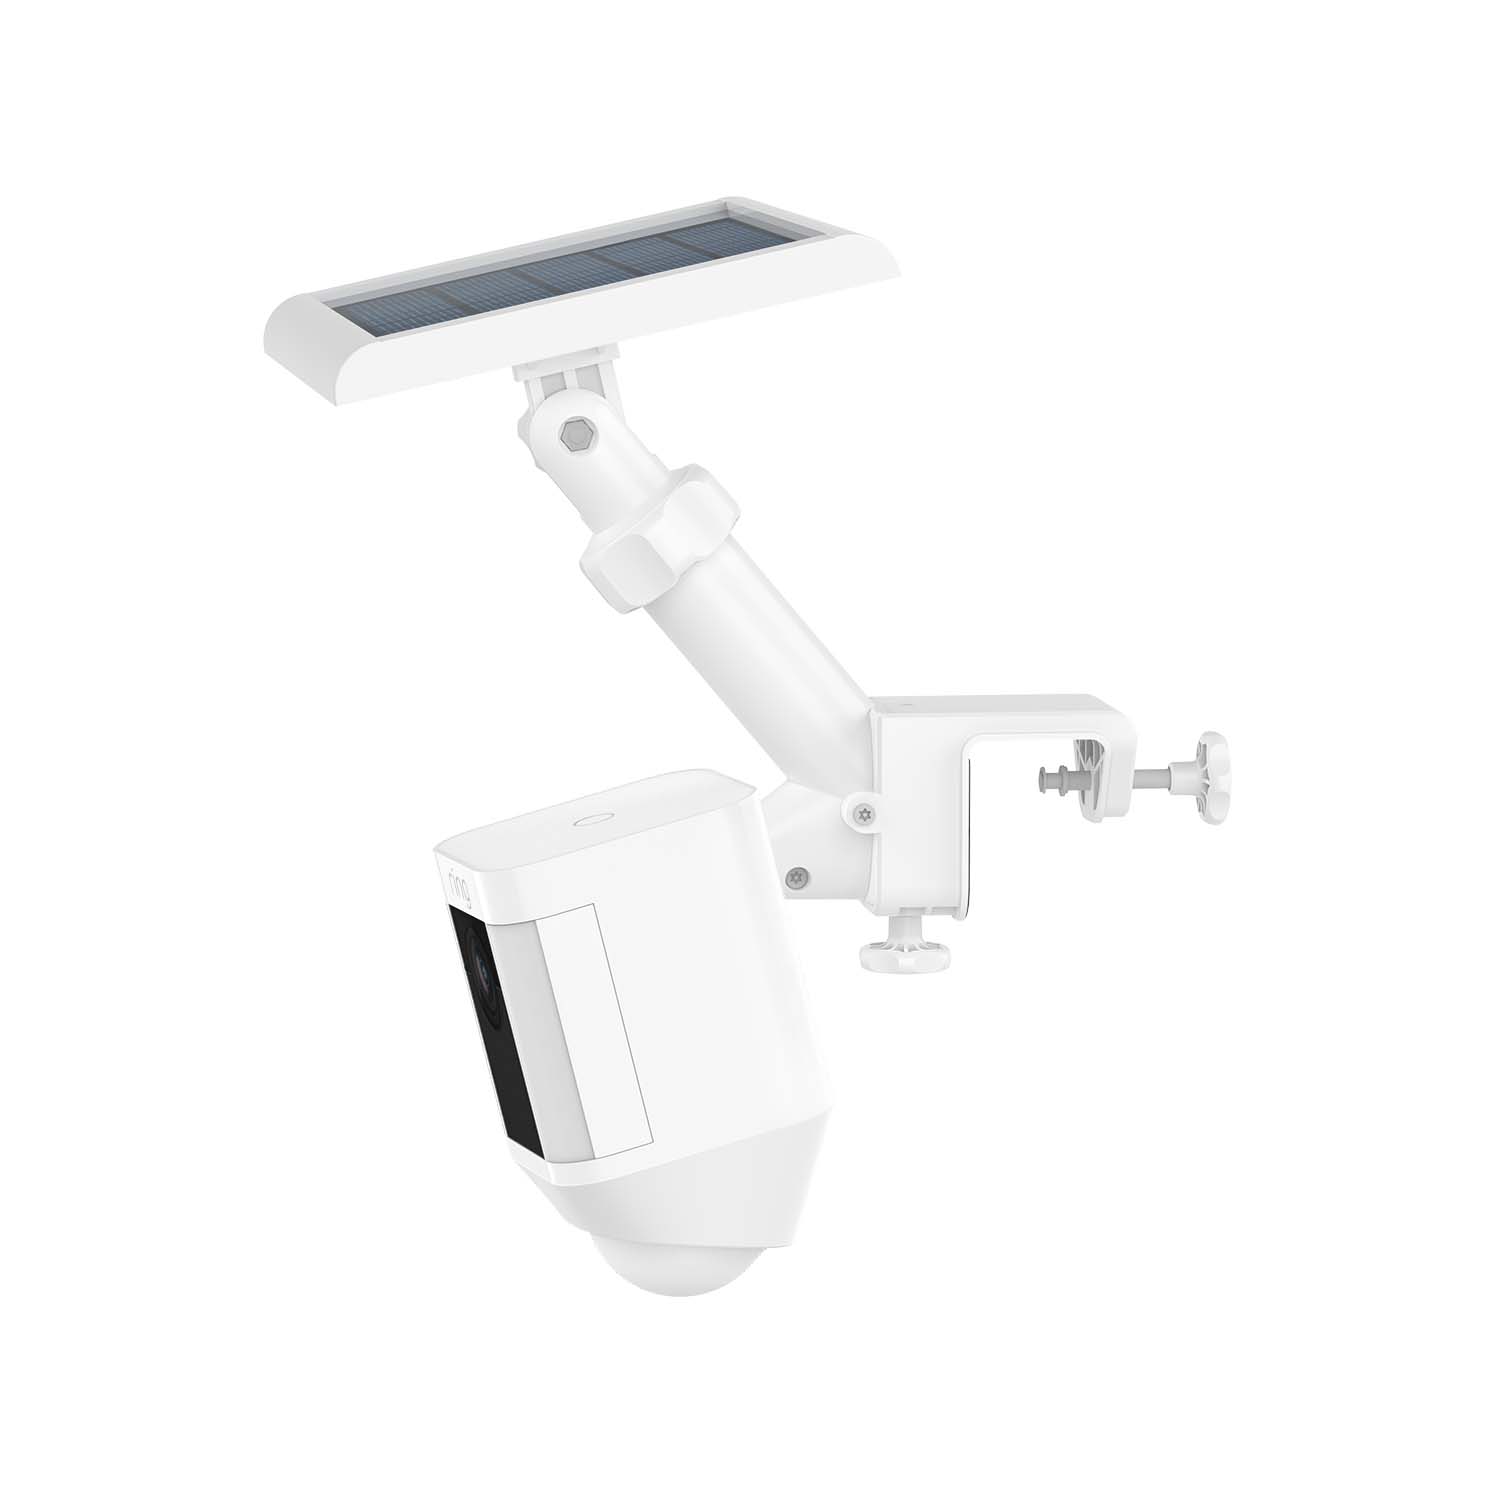 Gutter Mount for Solar Panels and Cams - White